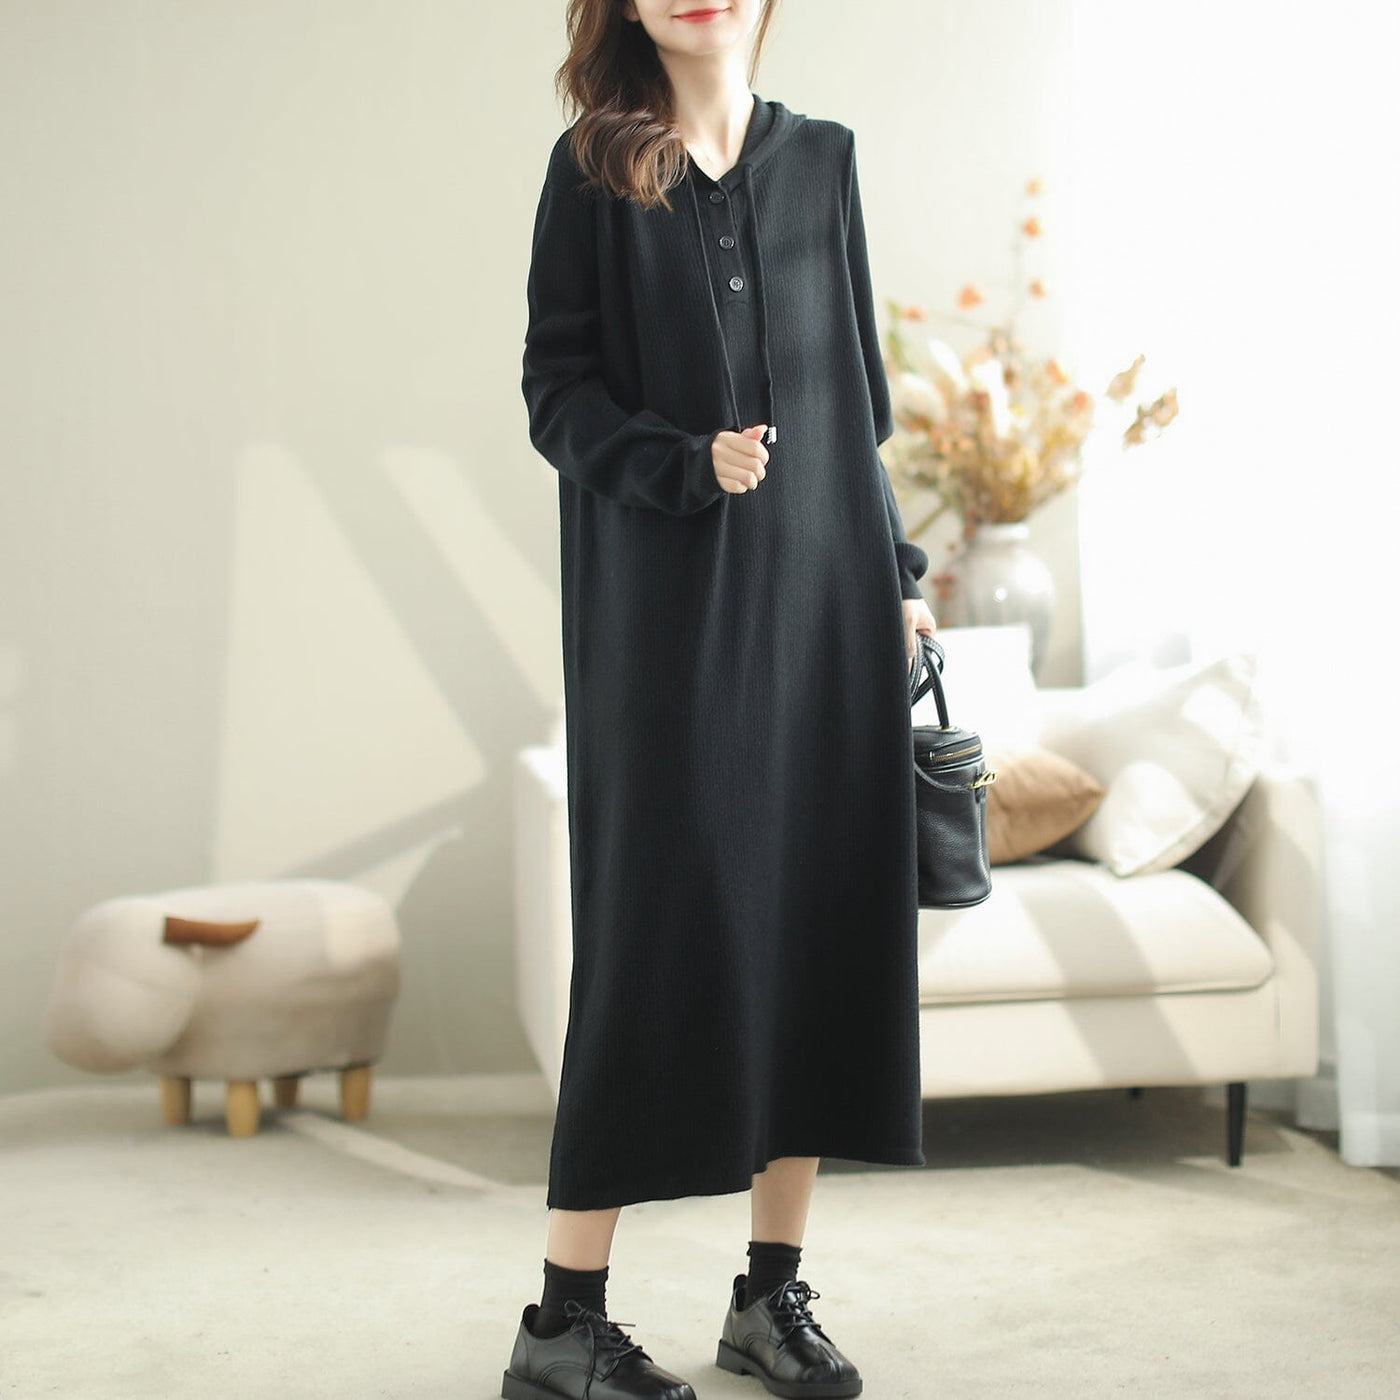 Autumn Solid Minimalist Hooded Knitted Dress